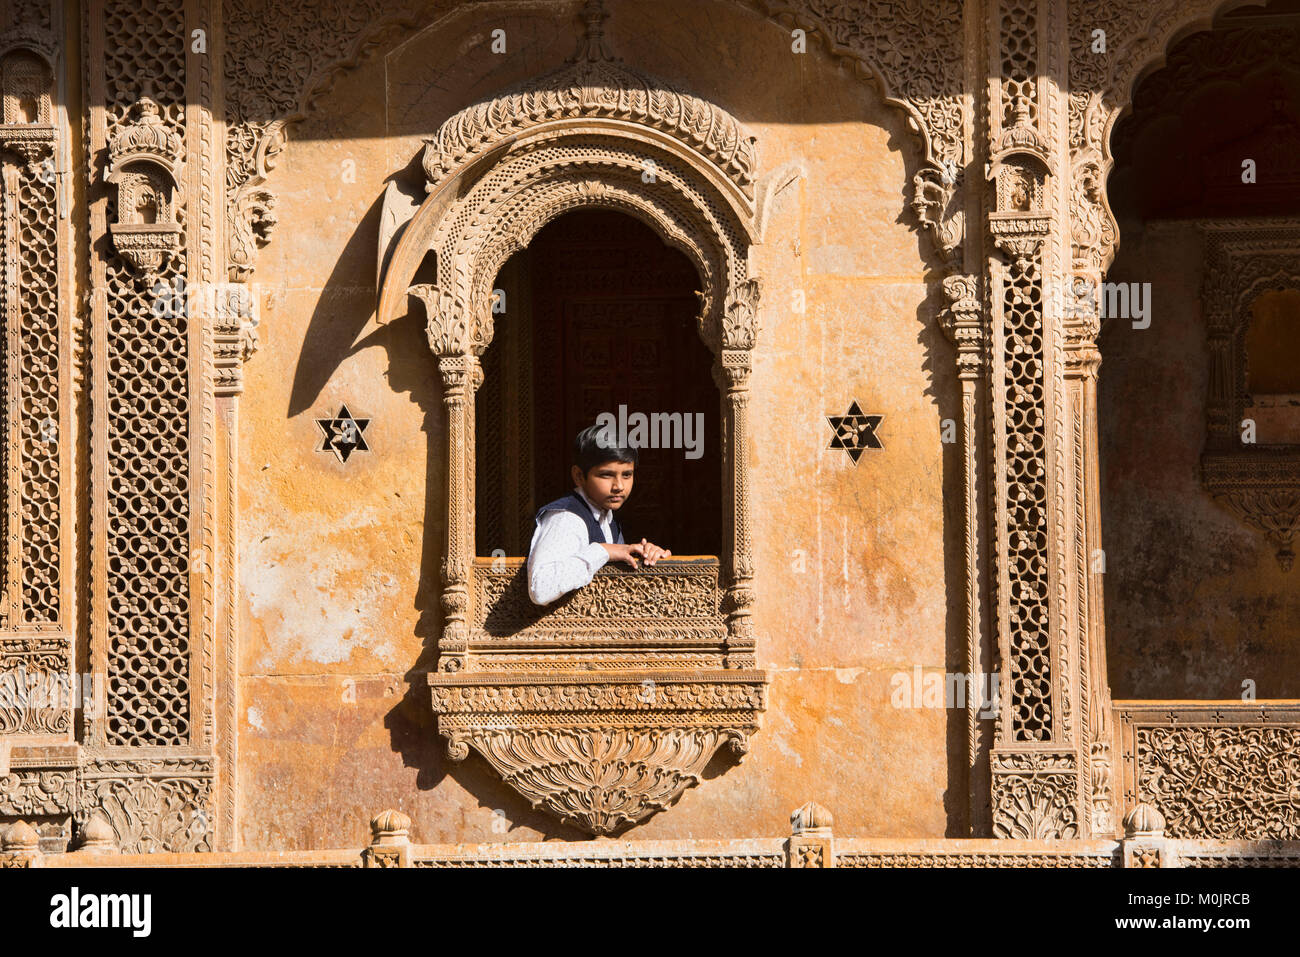 Looking out from the sandstone carved Patwon Ji Ki Haveli, Jaisalmer, Rajasthan, India Stock Photo